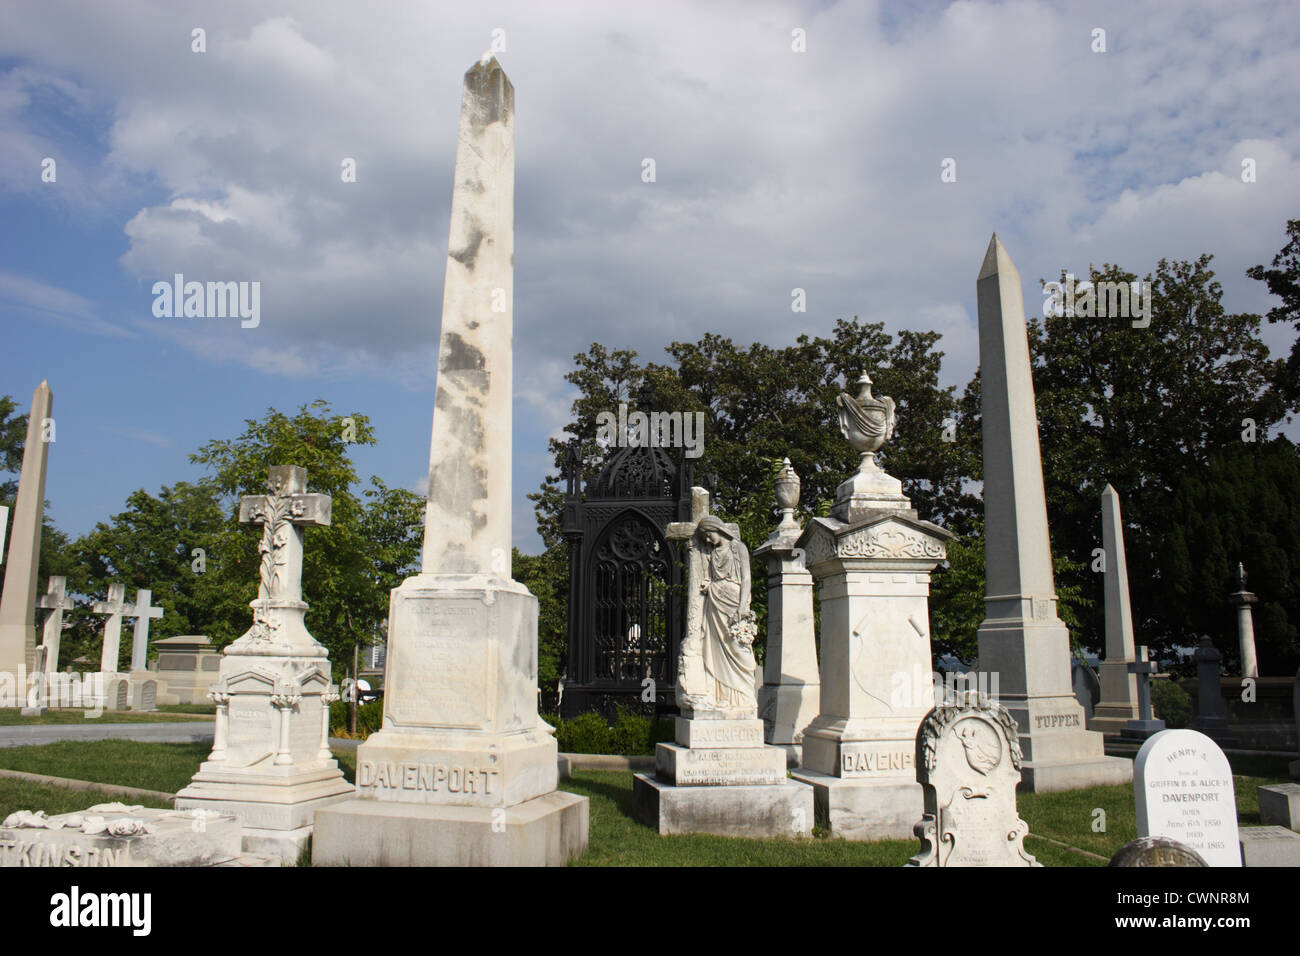 Hollywood cemetery in Richmond, Virginia. President James Madison and John Tyler's burial place. Jefferson Davis burial site. Stock Photo